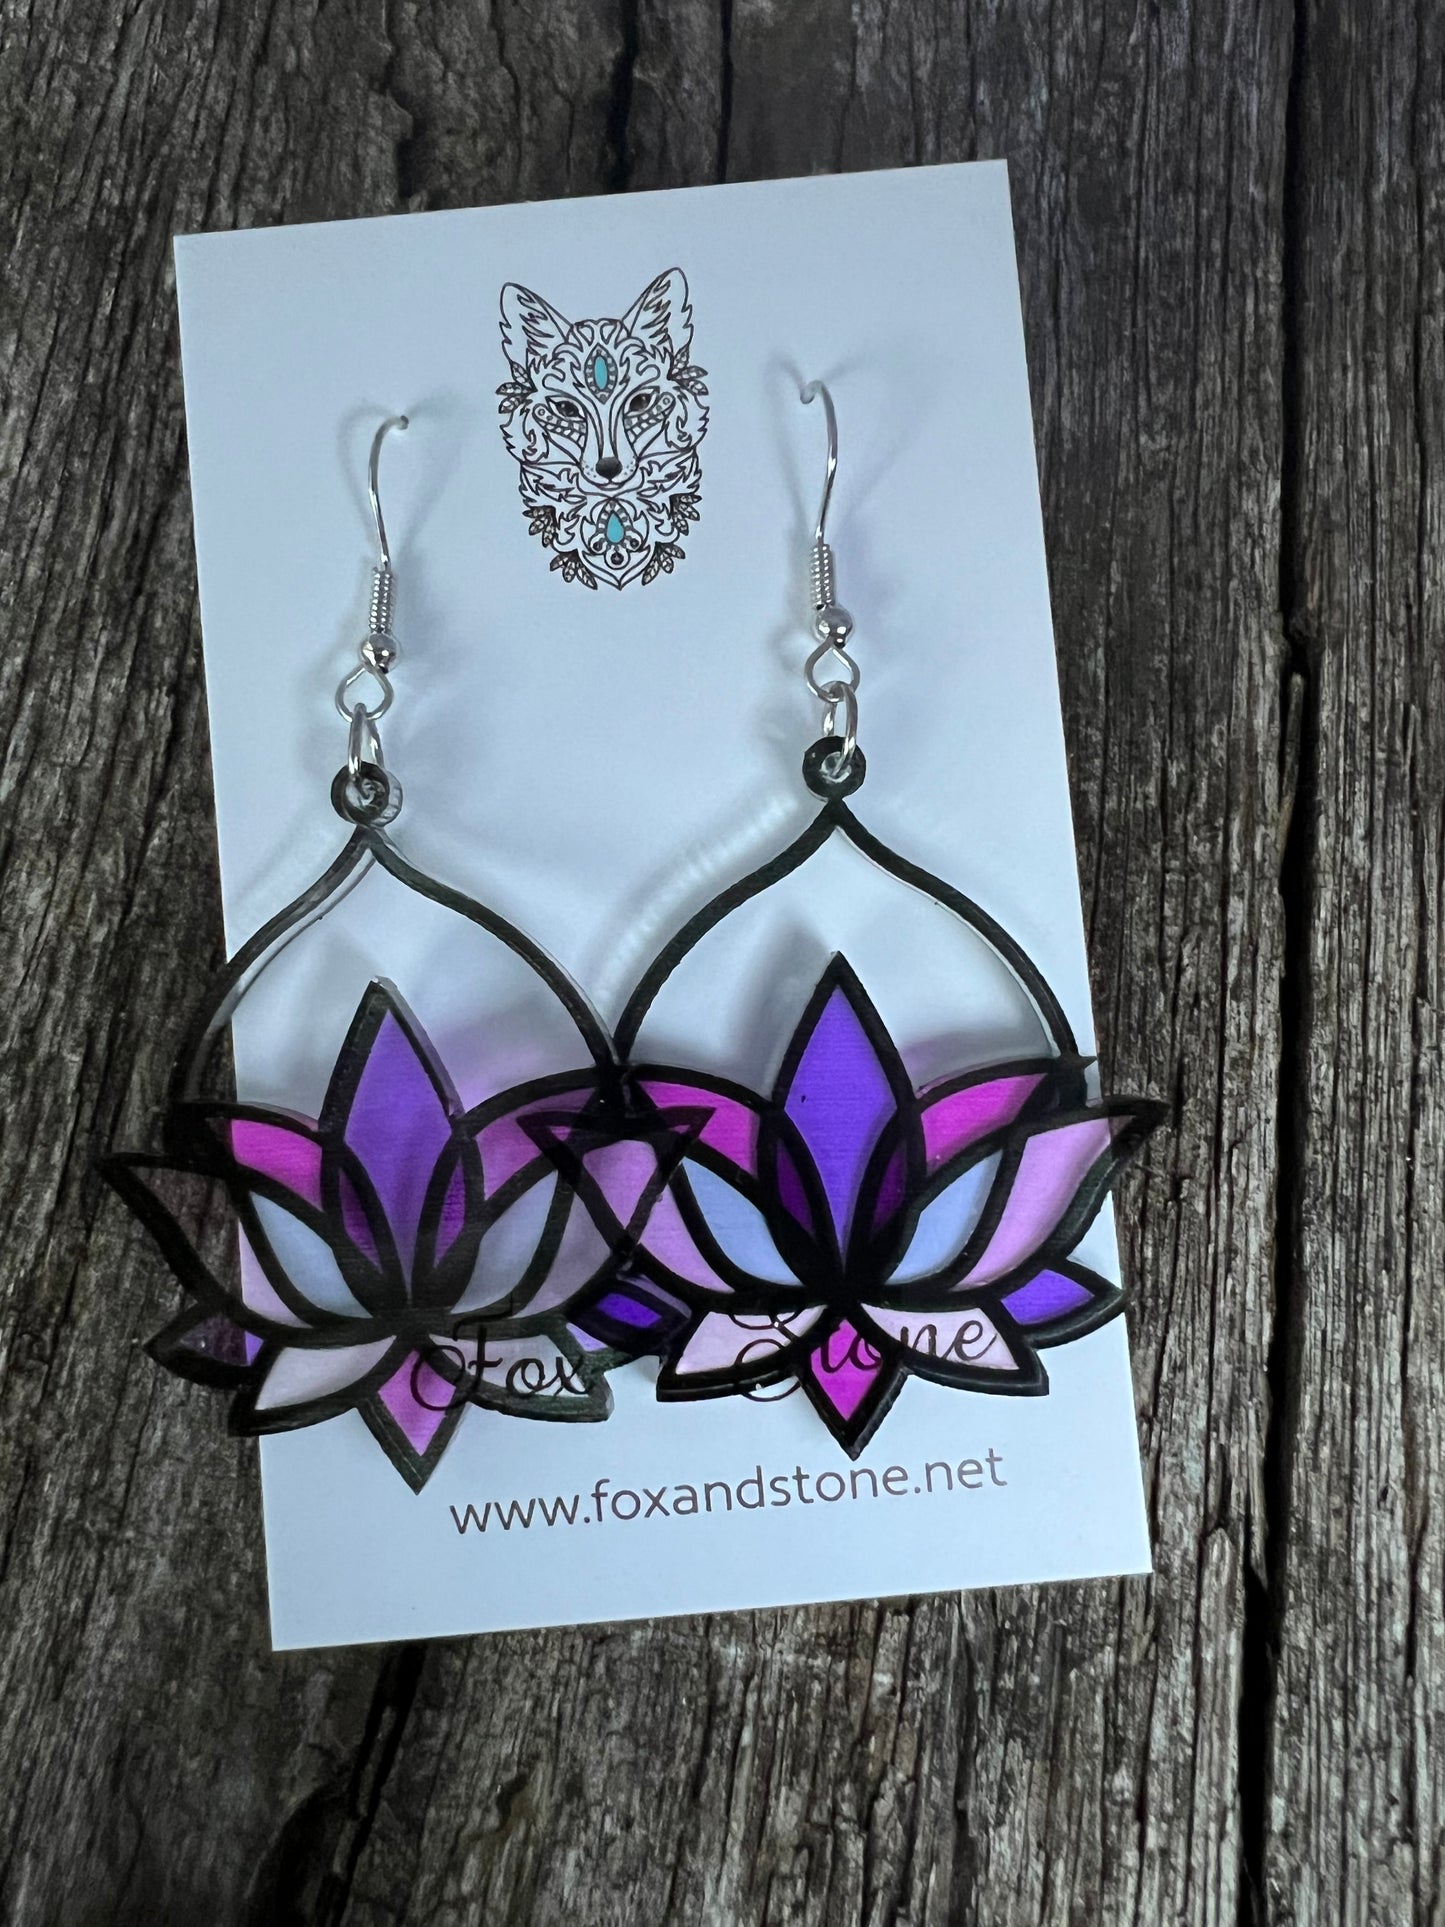 Francessca Faux Stained Glass Earrings